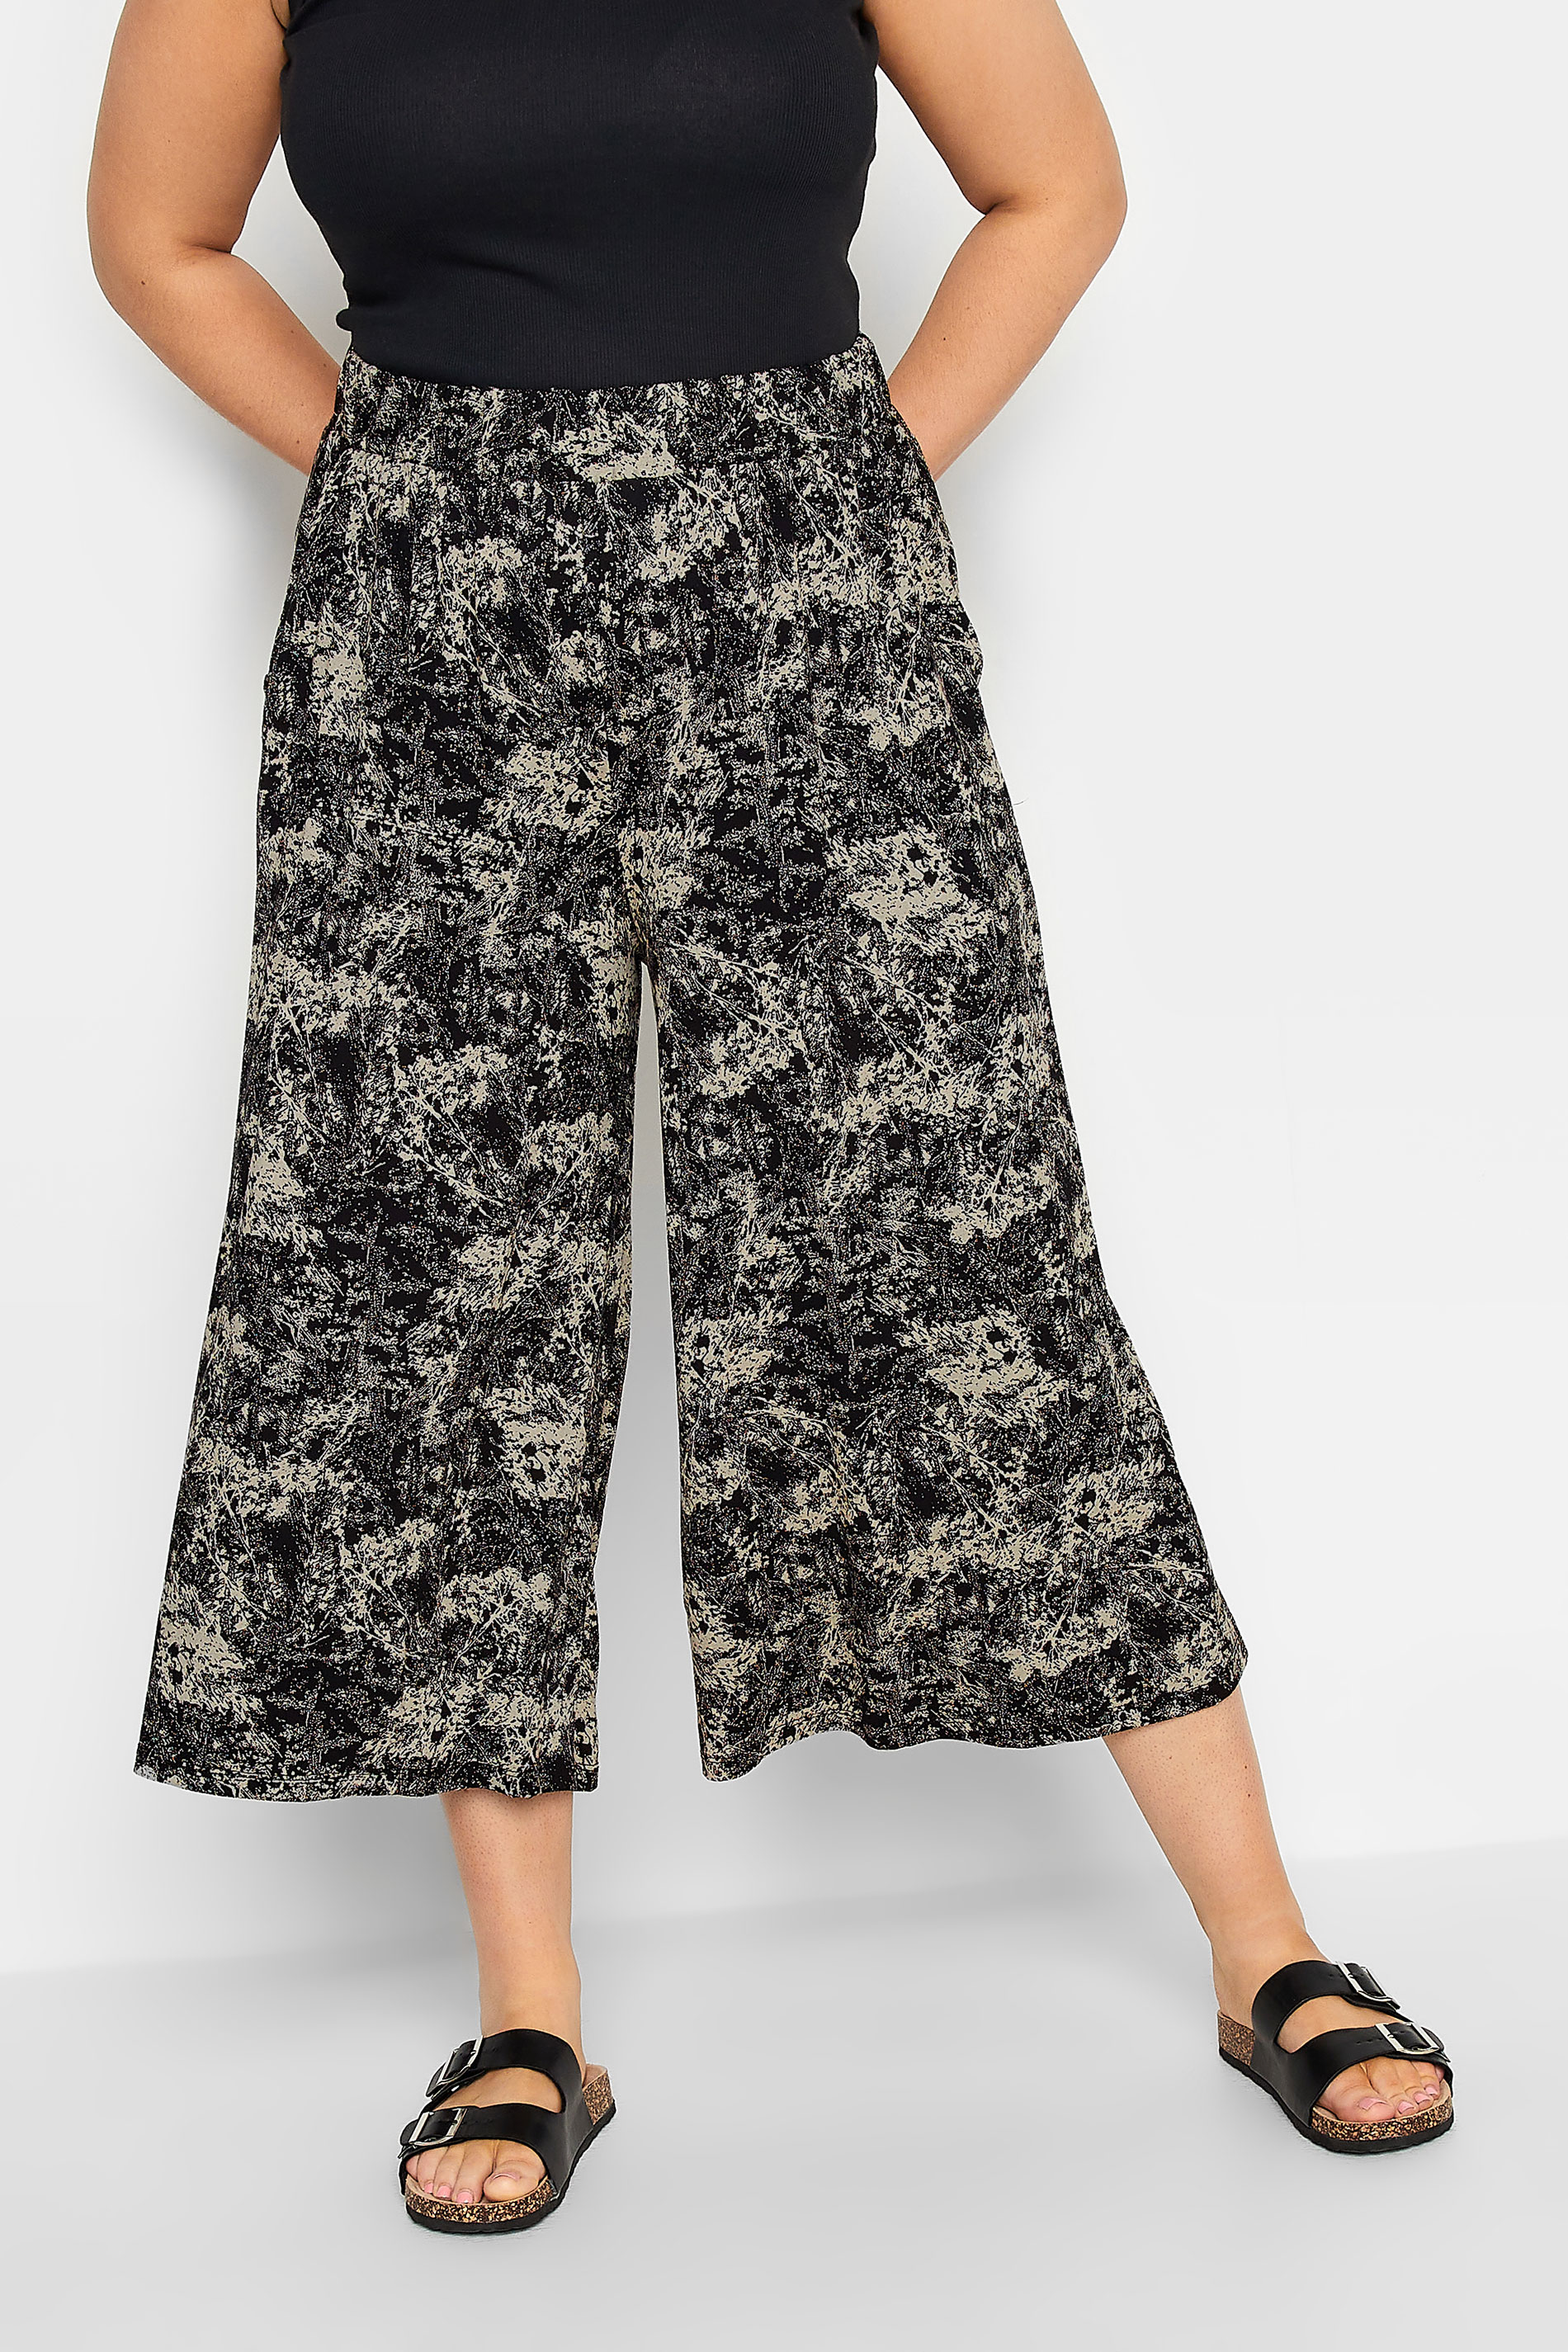 YOURS Curve Black Abstract Print Midaxi Culottes | Yours Clothing 1